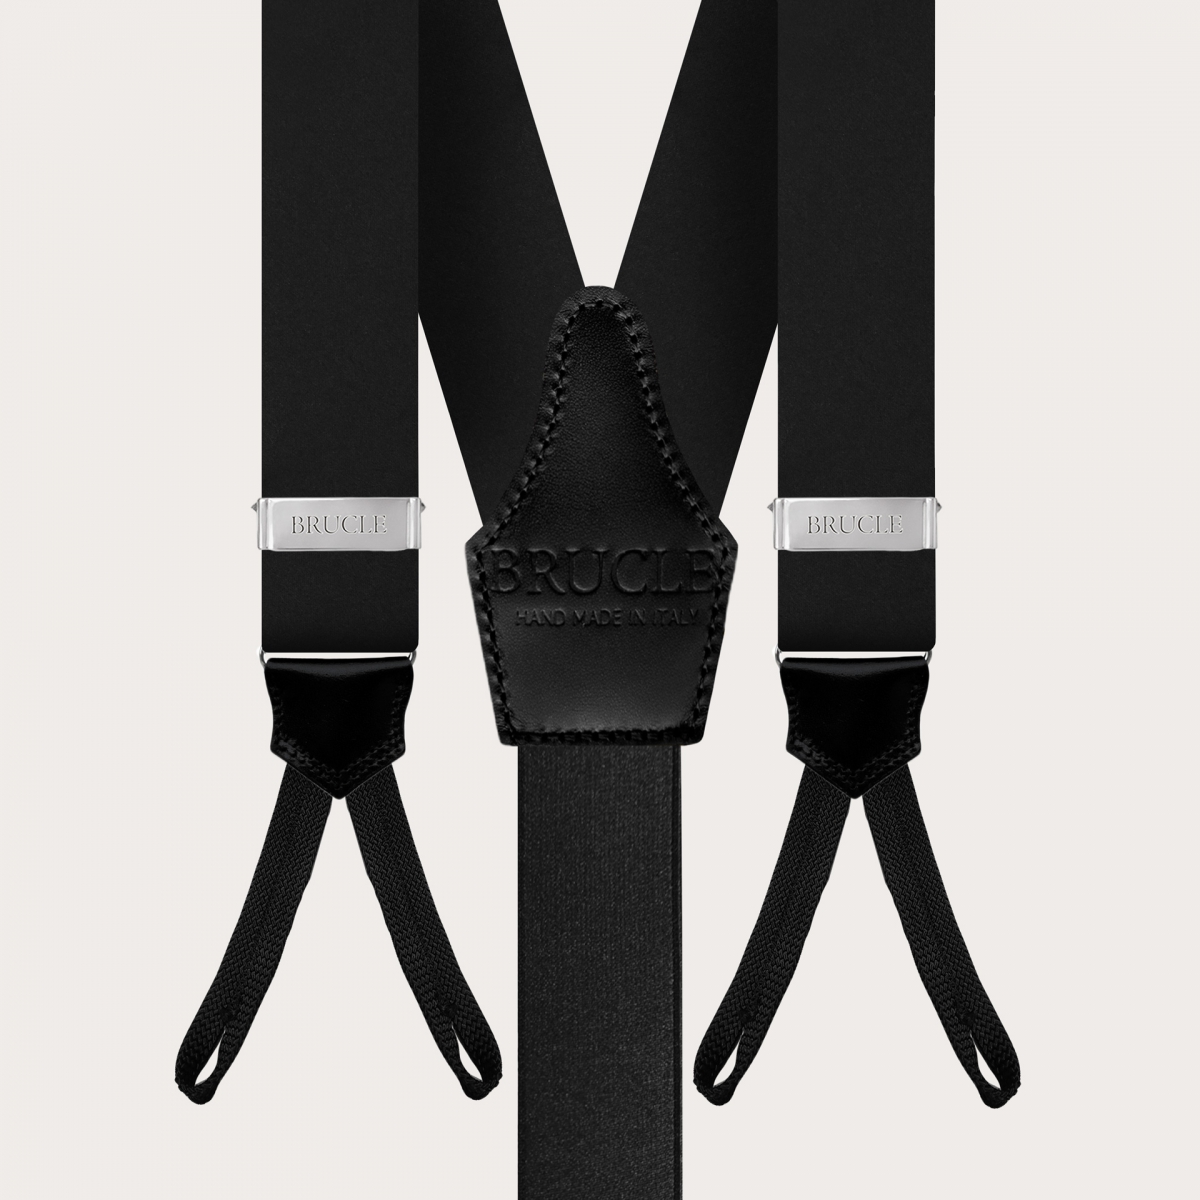 BRUCLE Suspenders in silk satin with buttonholes, black